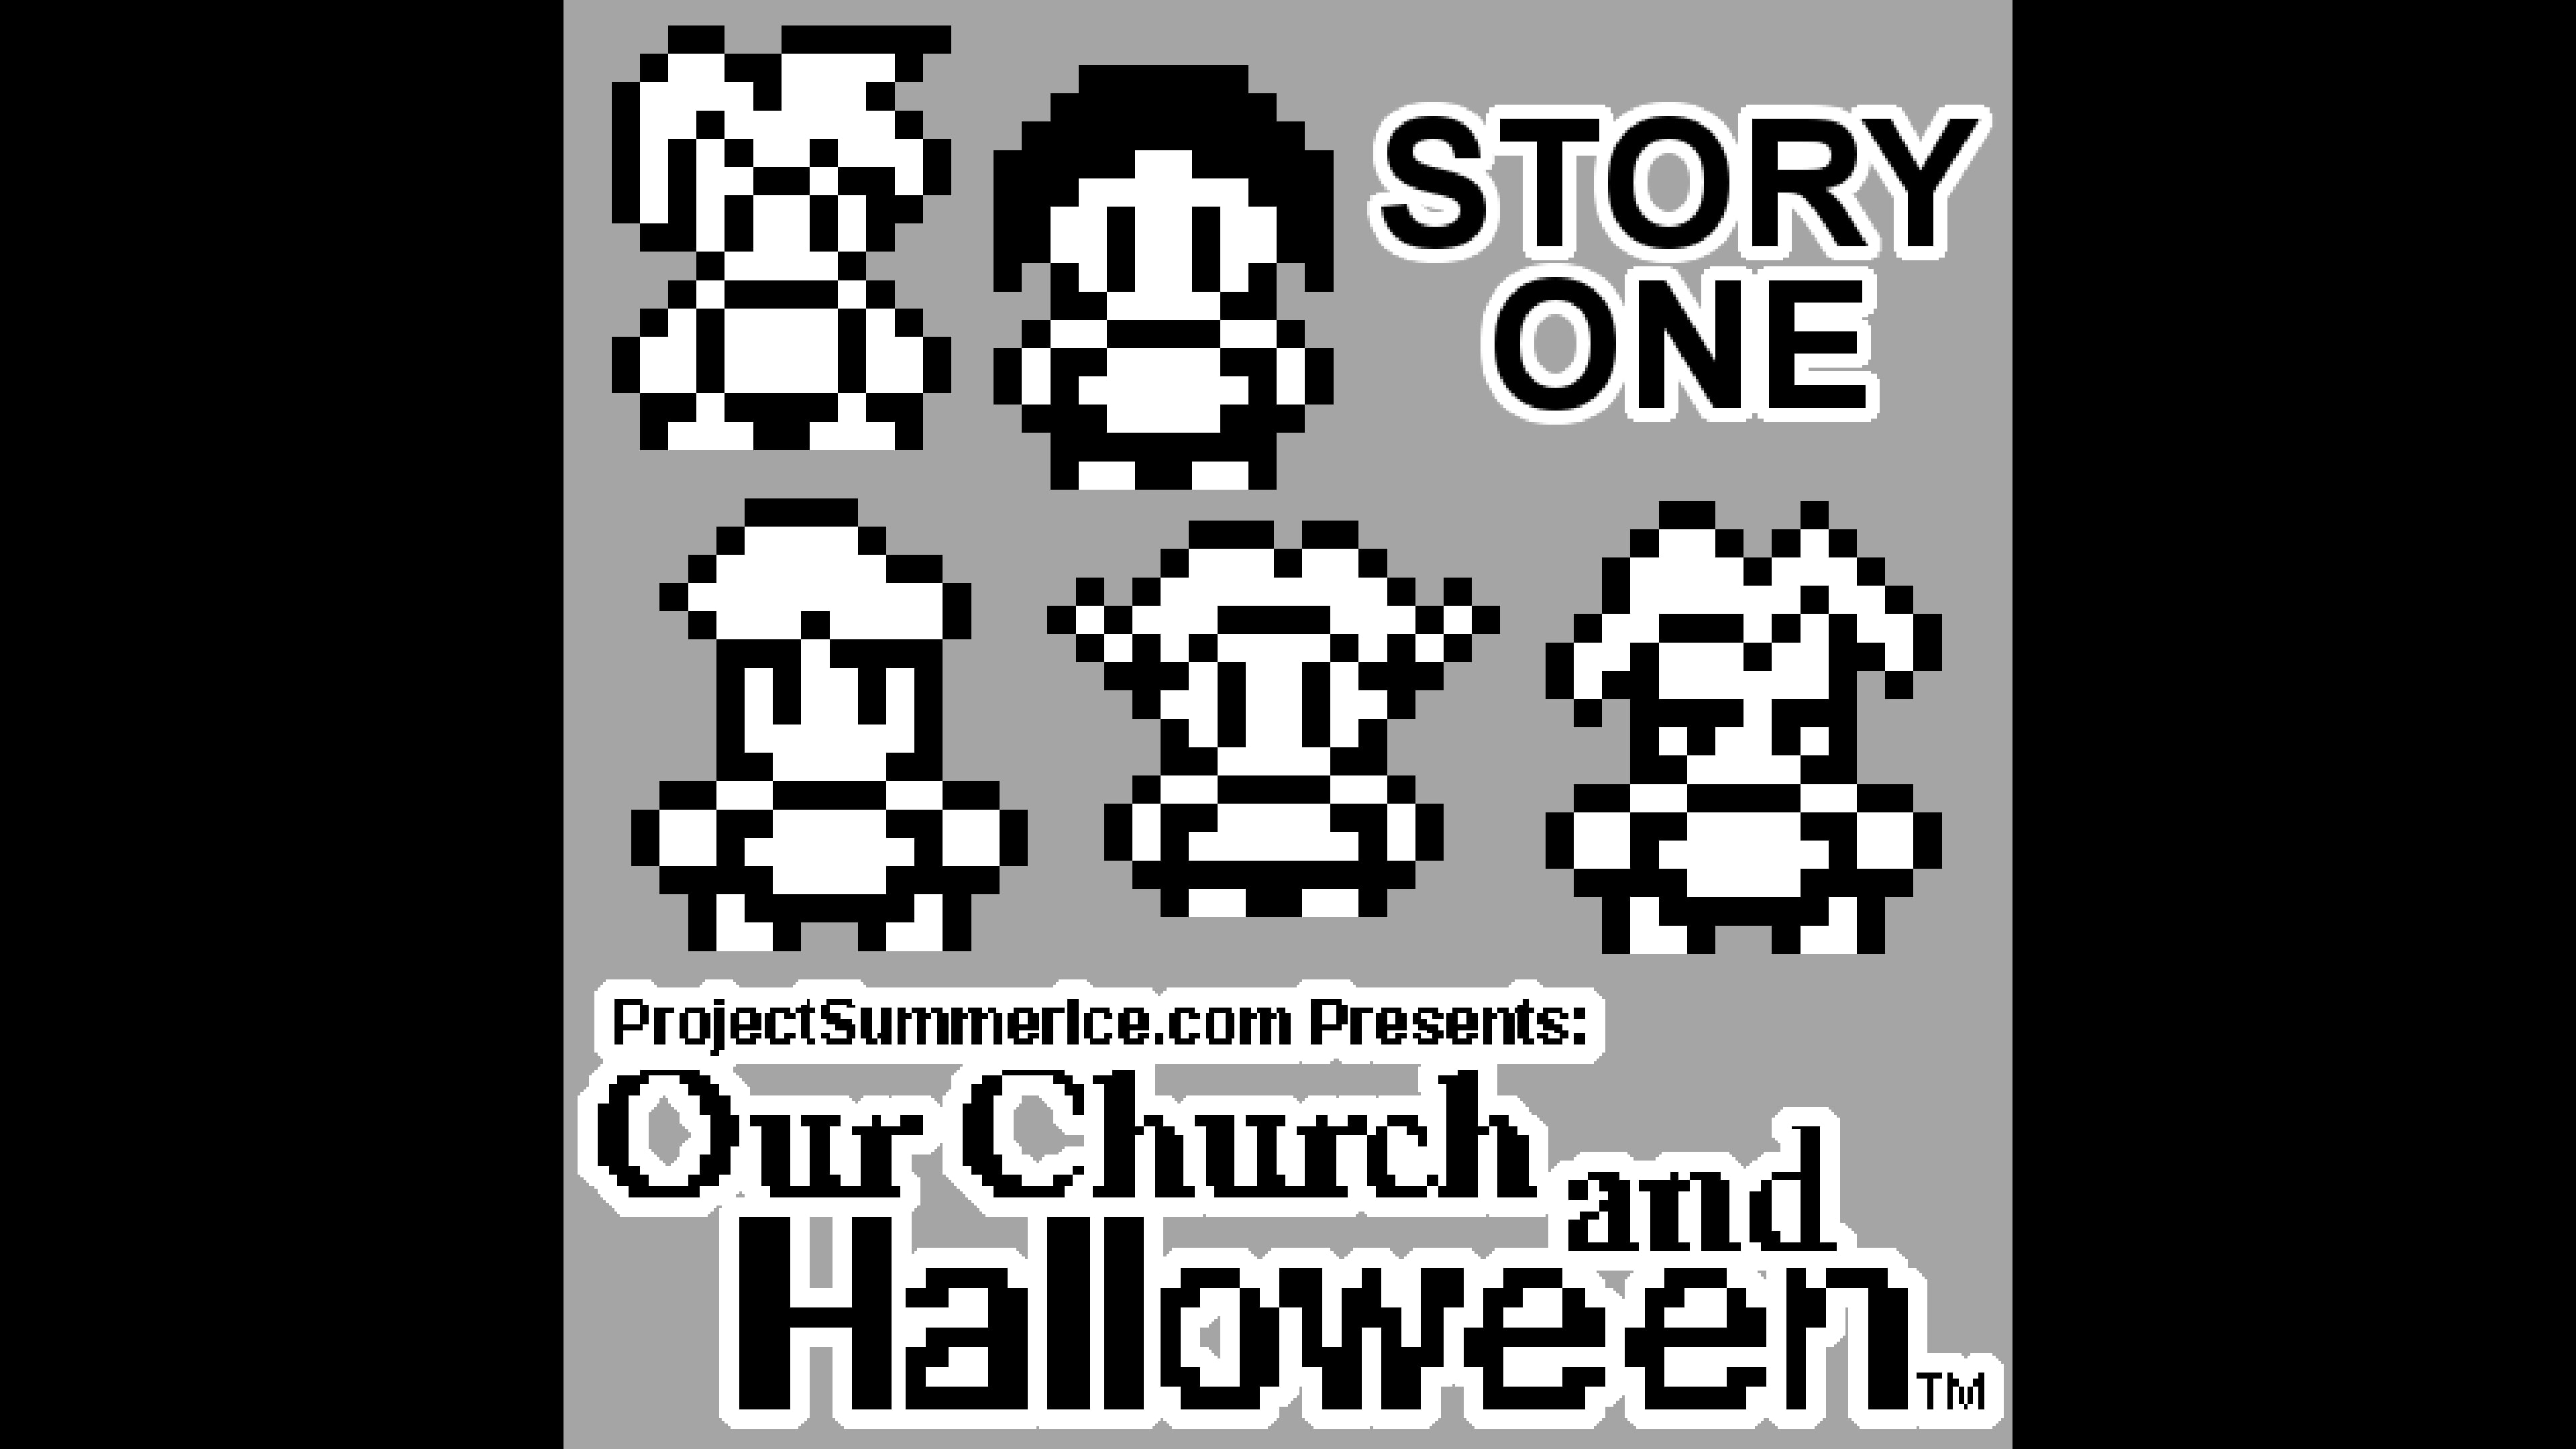 Our Church and Halloween RPG - Story One